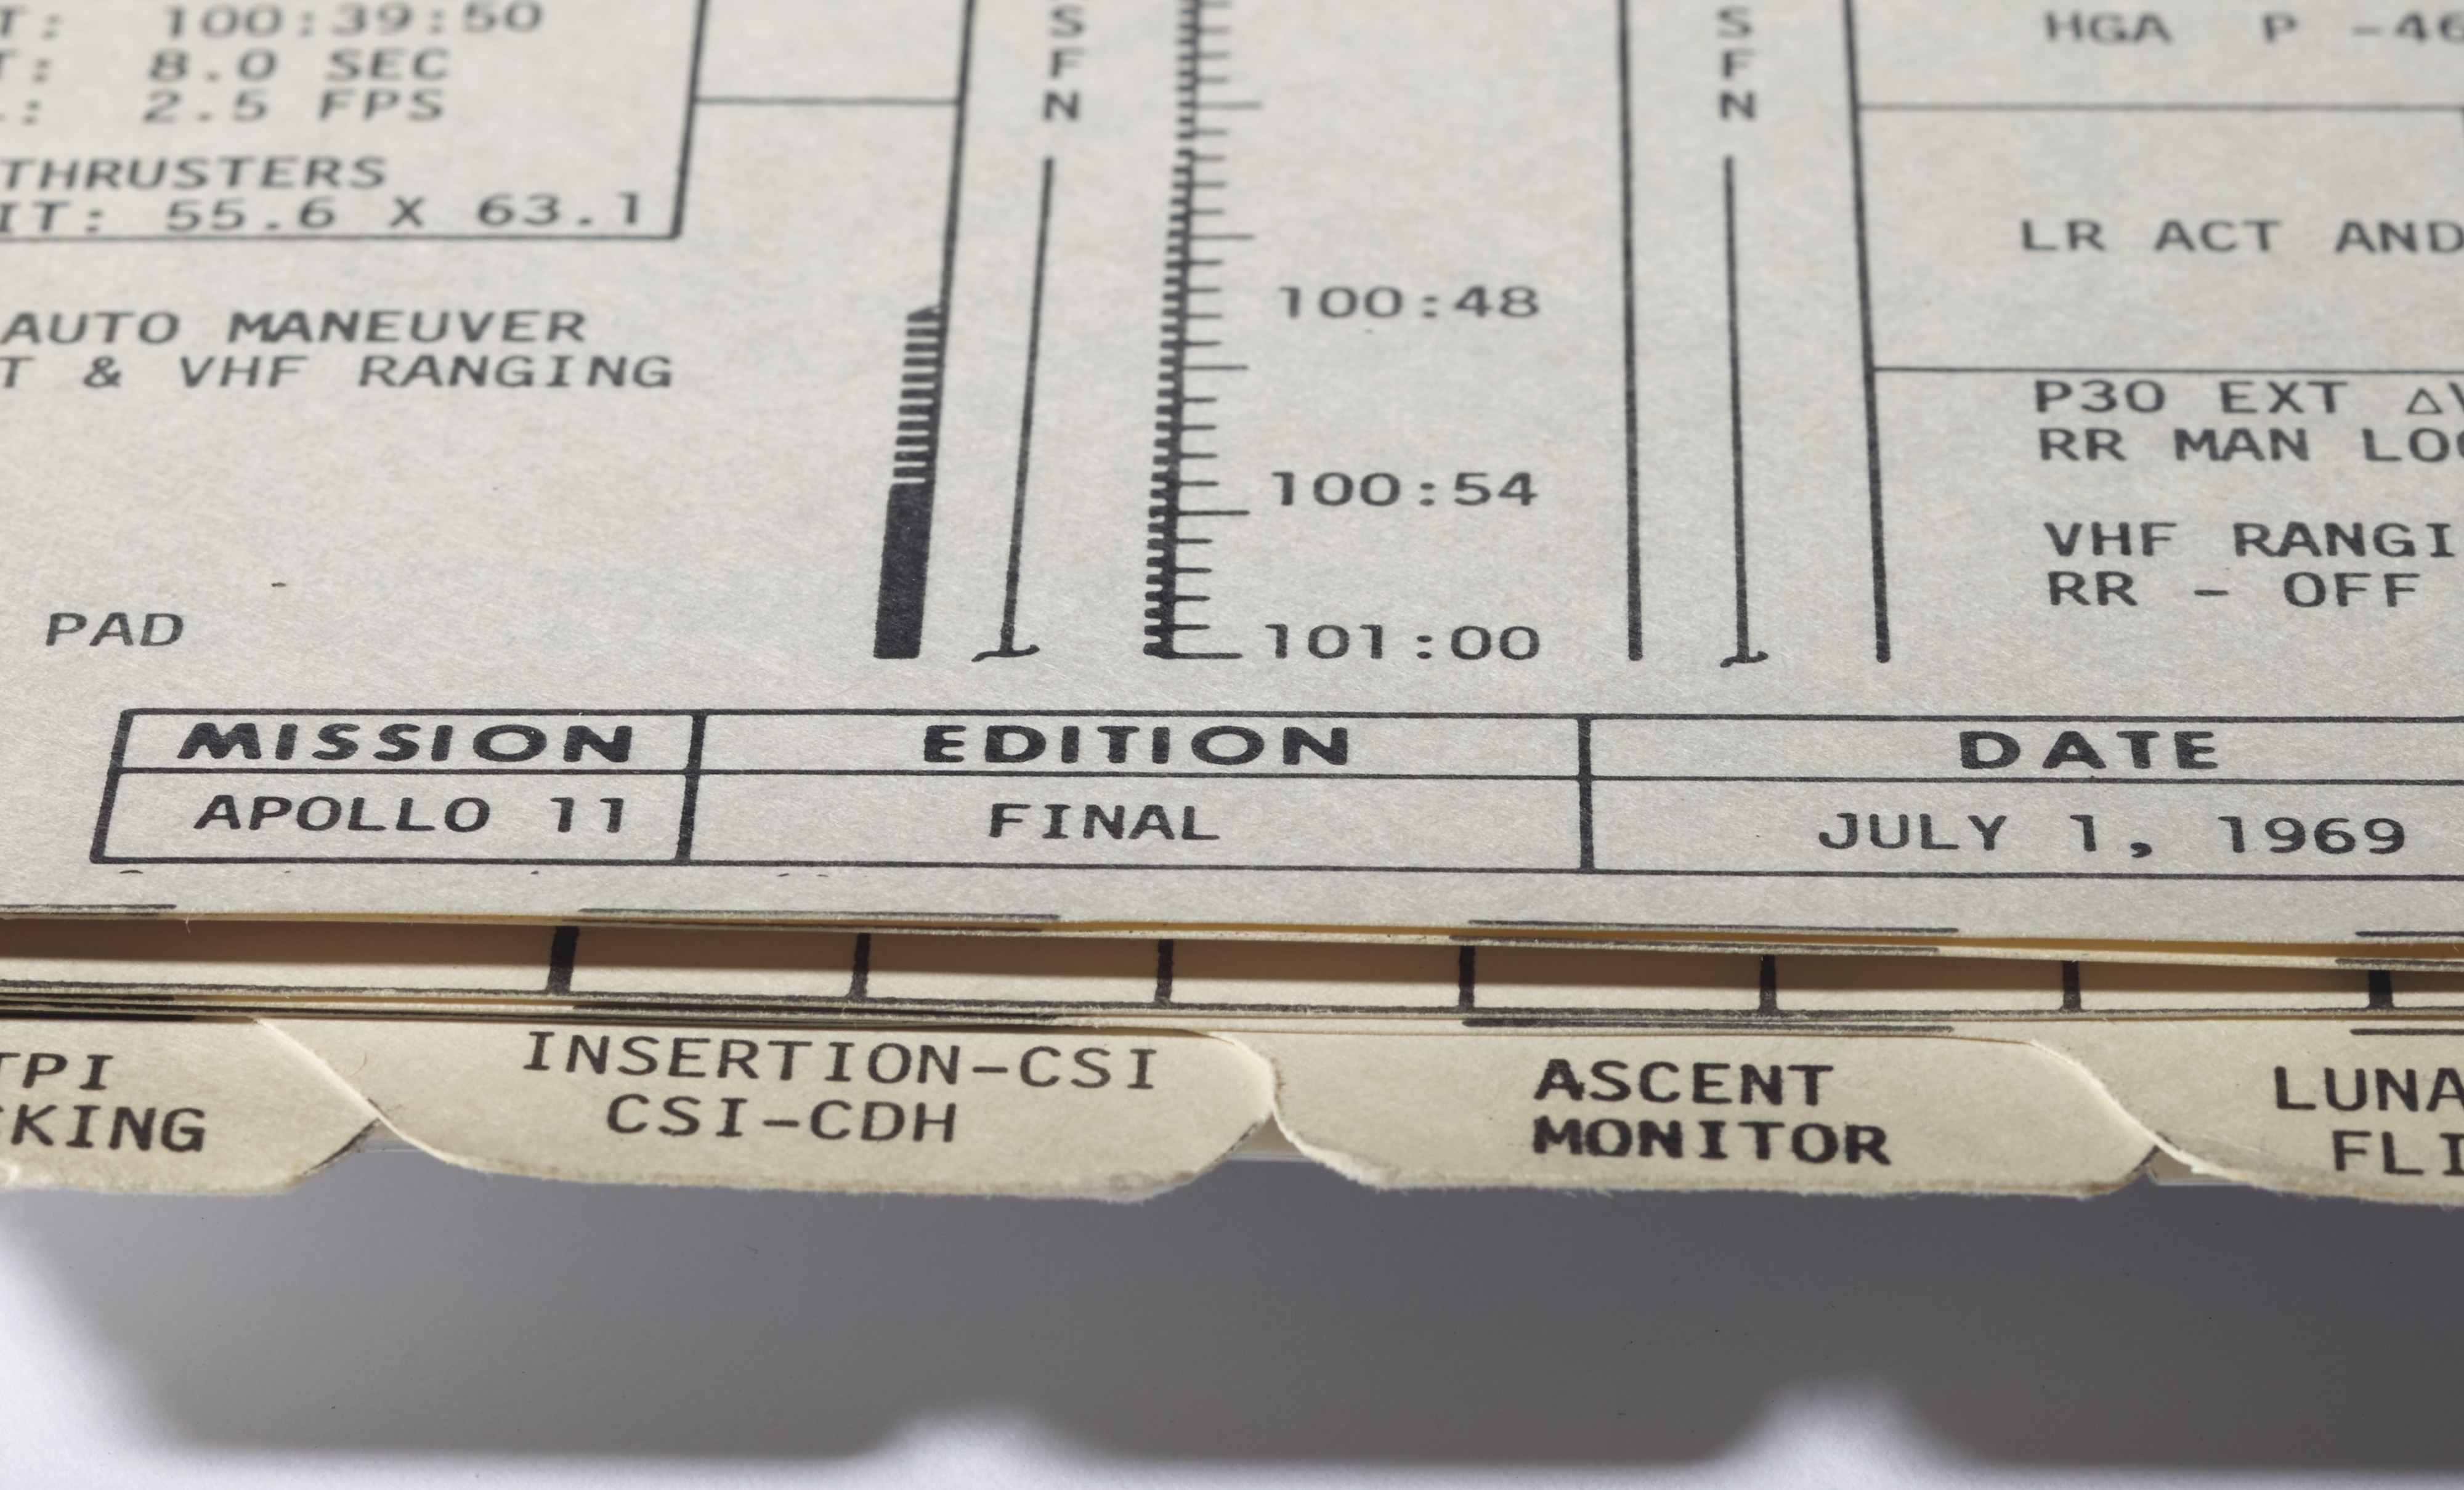 Apollo 11 manual expected to sell for millions - CNN Style